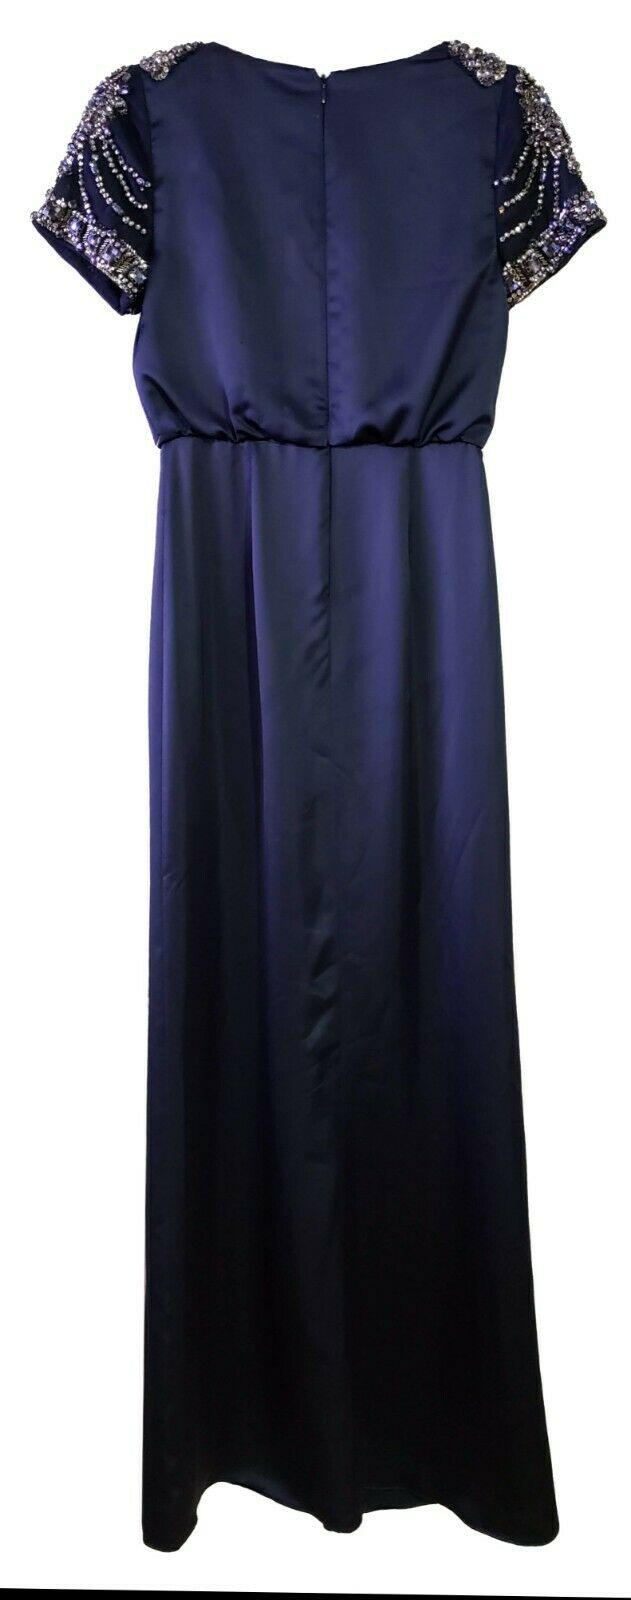 Aidan Mattox Womens Navy Embellished Faux Wrap Evening Dress Gown Size 0 - SVNYFancy